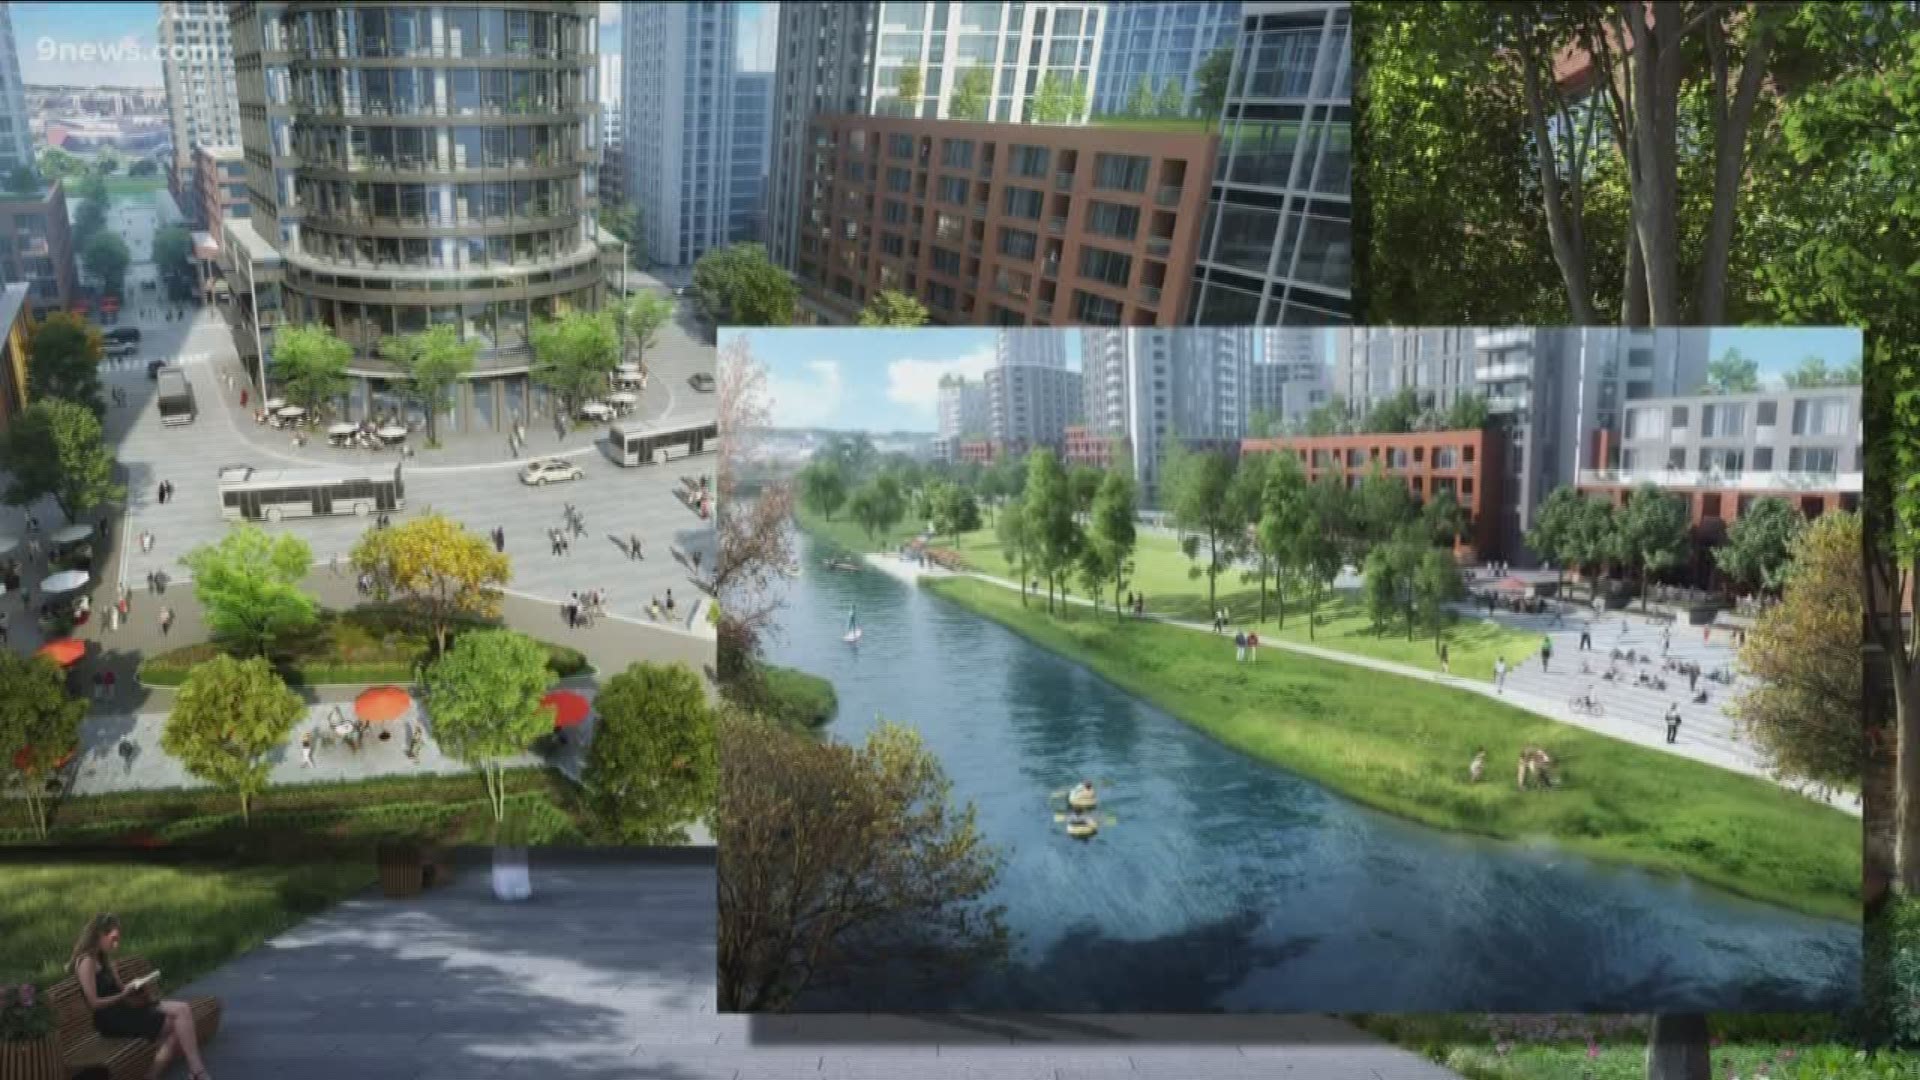 9NEWS report from November 2019: Elitch Gardens will one day relocate out of downtown Denver for a new project called River Mile.